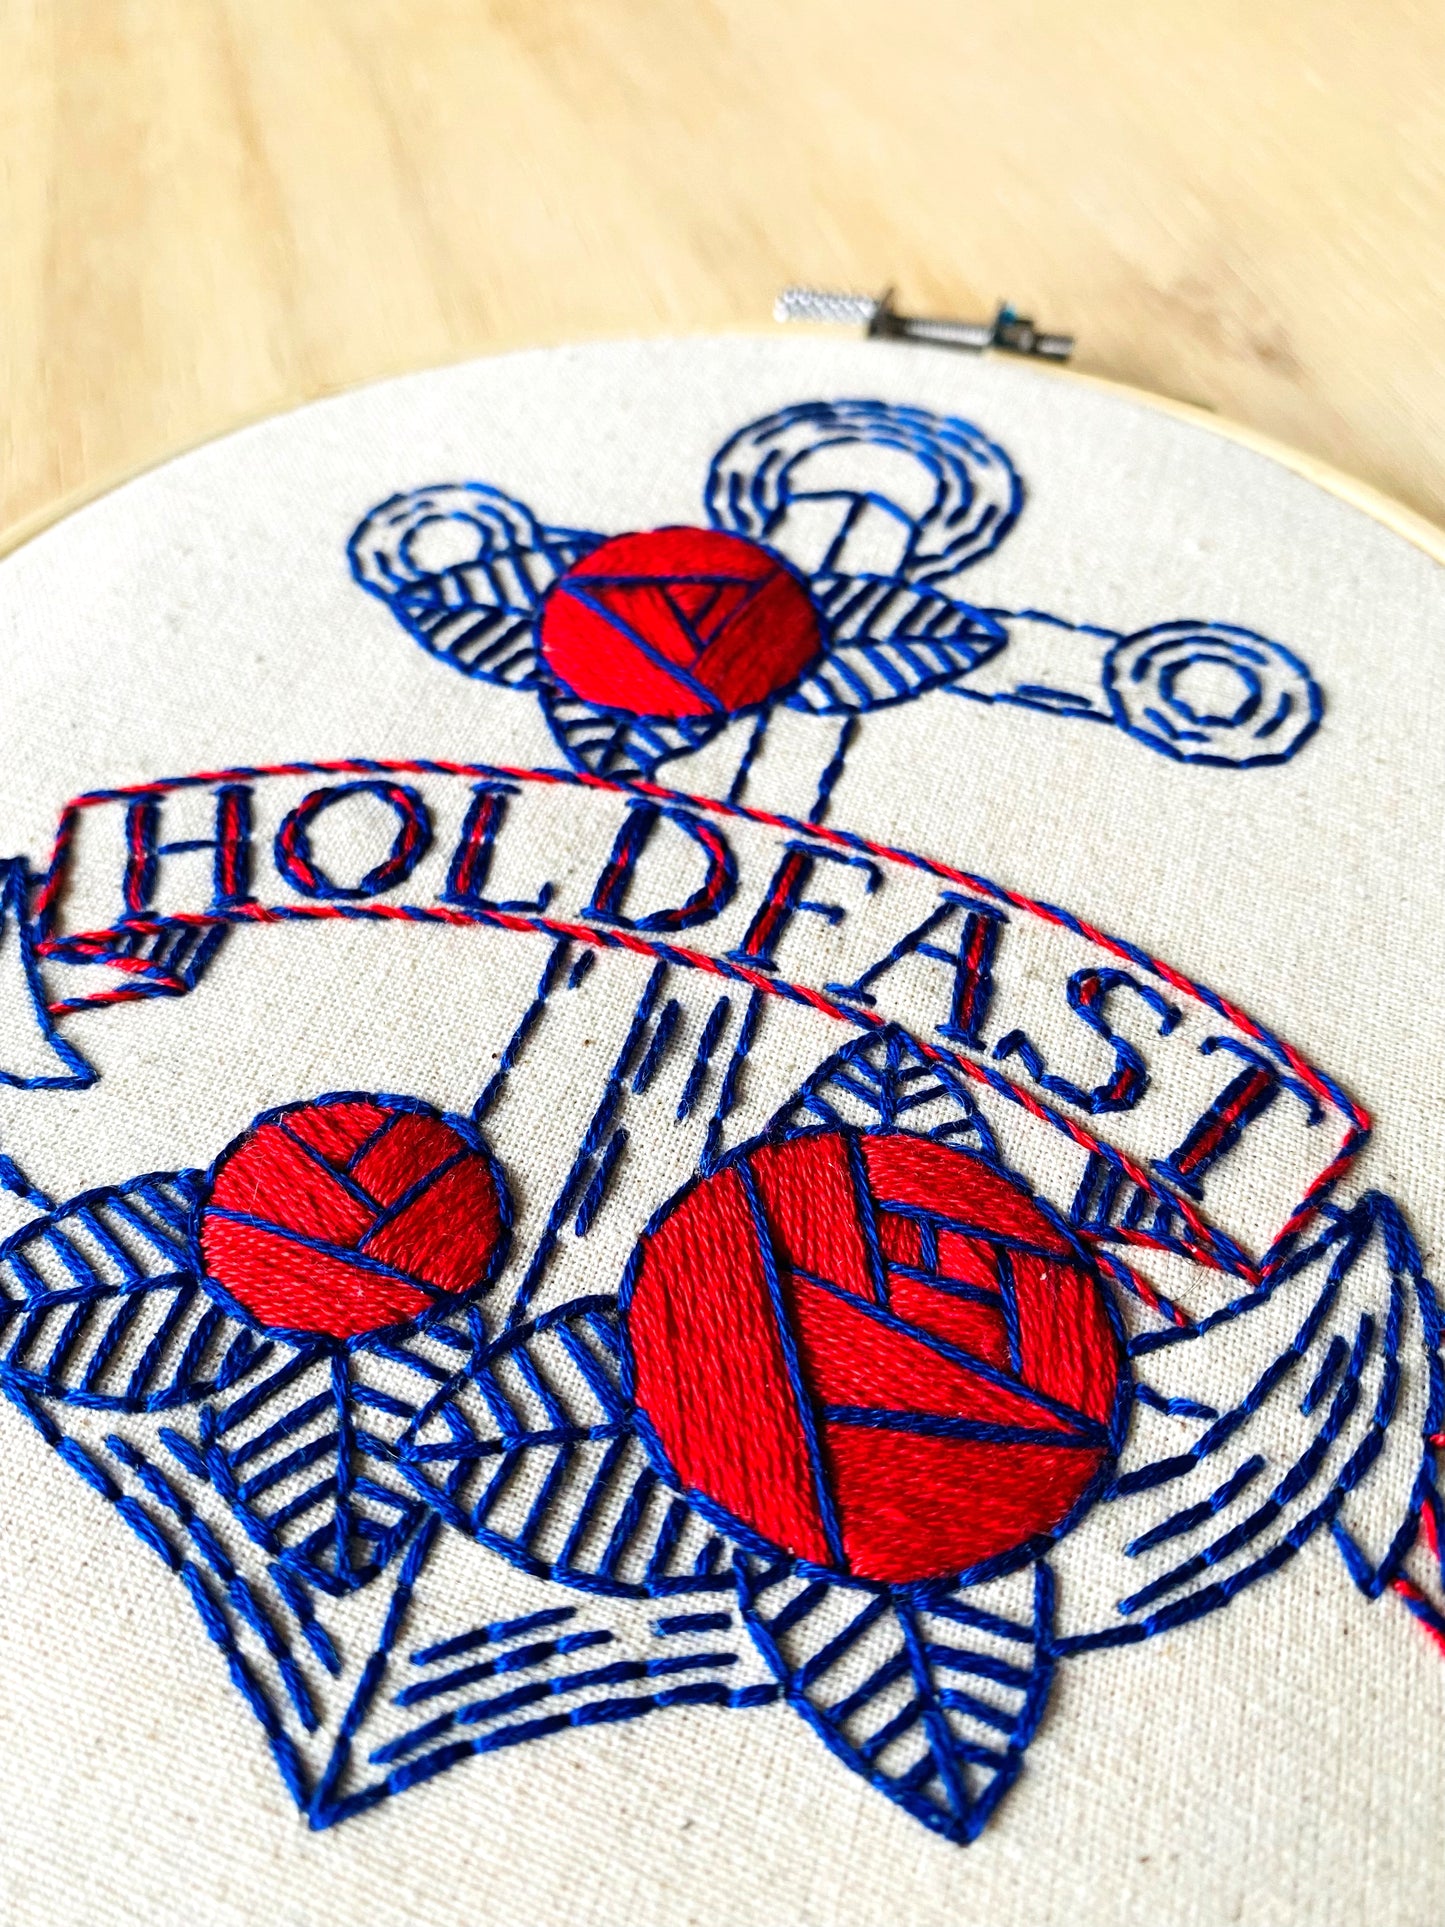 Holdfast Complete Embroidery Kit